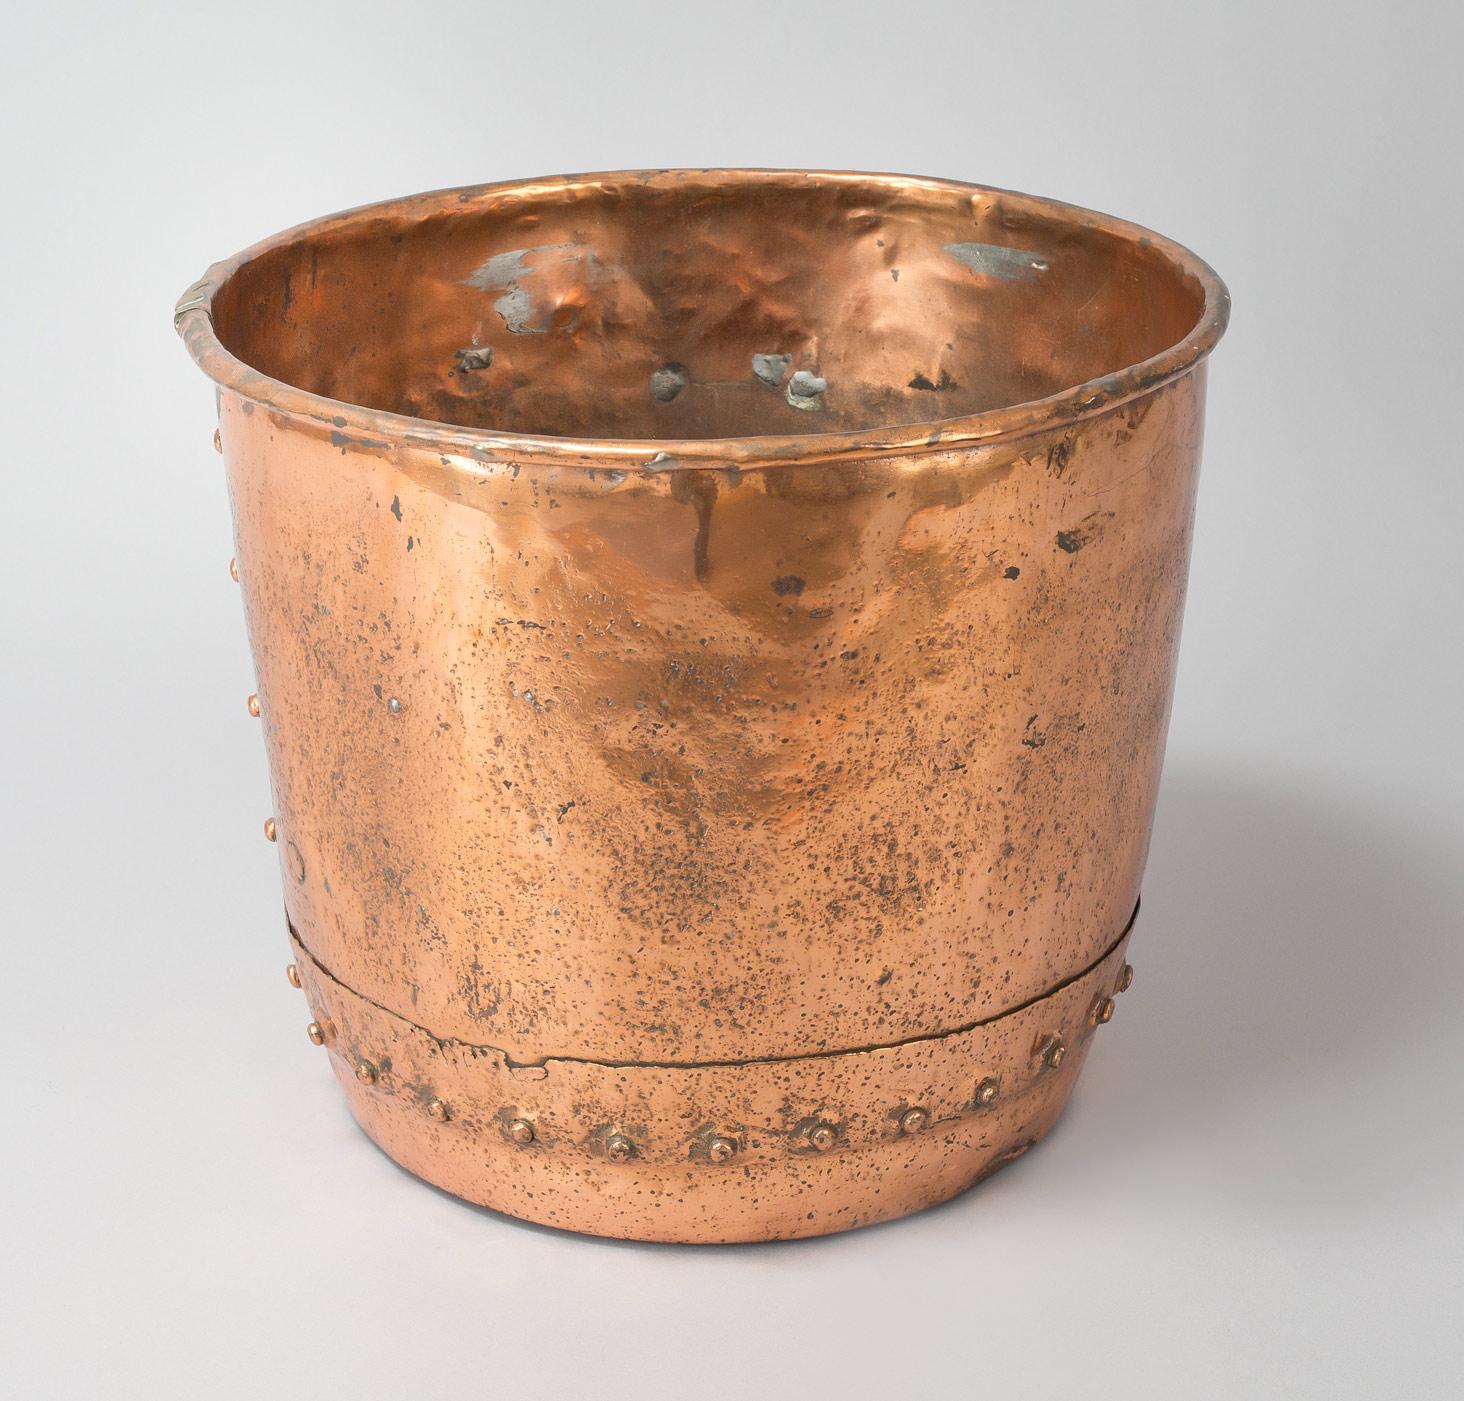 Copper “copper” planter with riveted seams and peened over rim. Also great for storing kindling wood at the fireplace. Originally these coppers were used for boiling water.